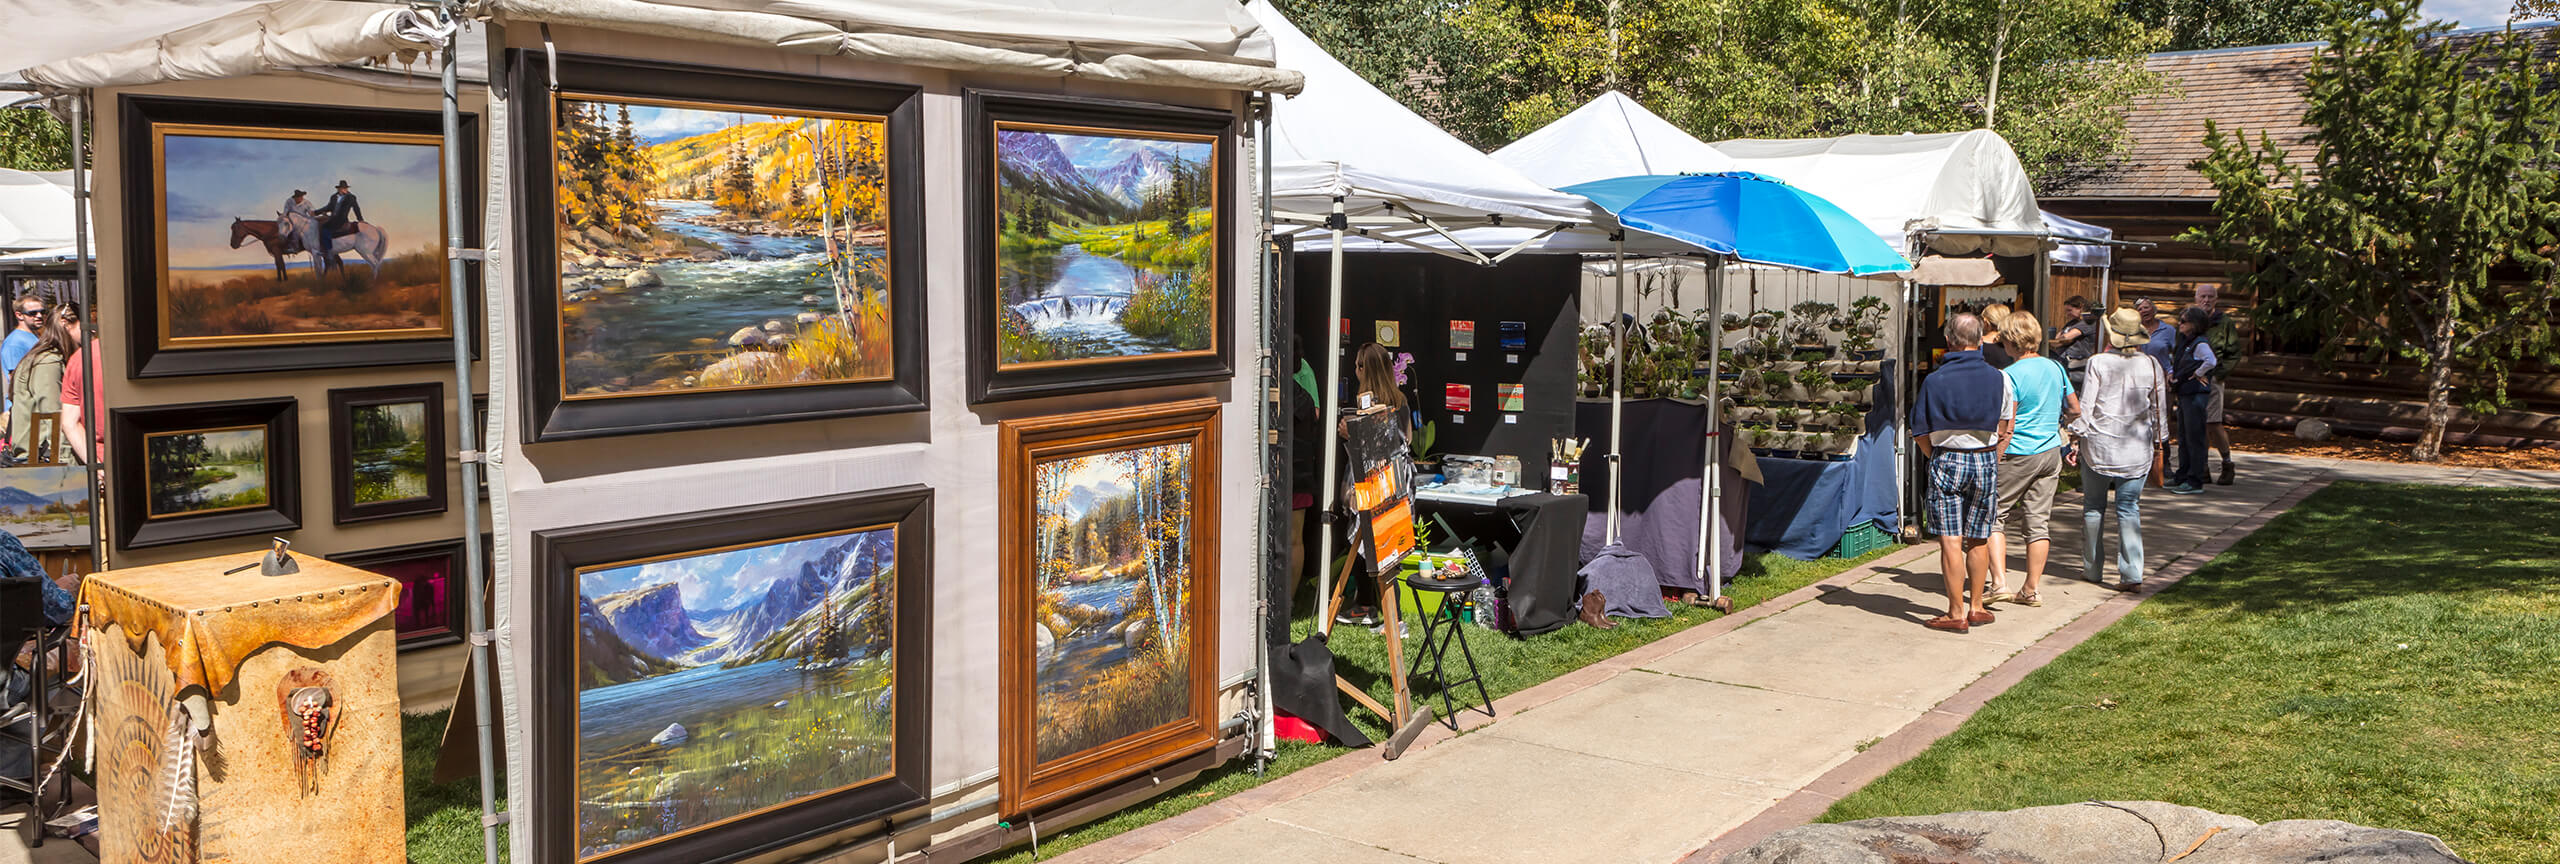 Artist booths set up in Frisco Historic Park at art show